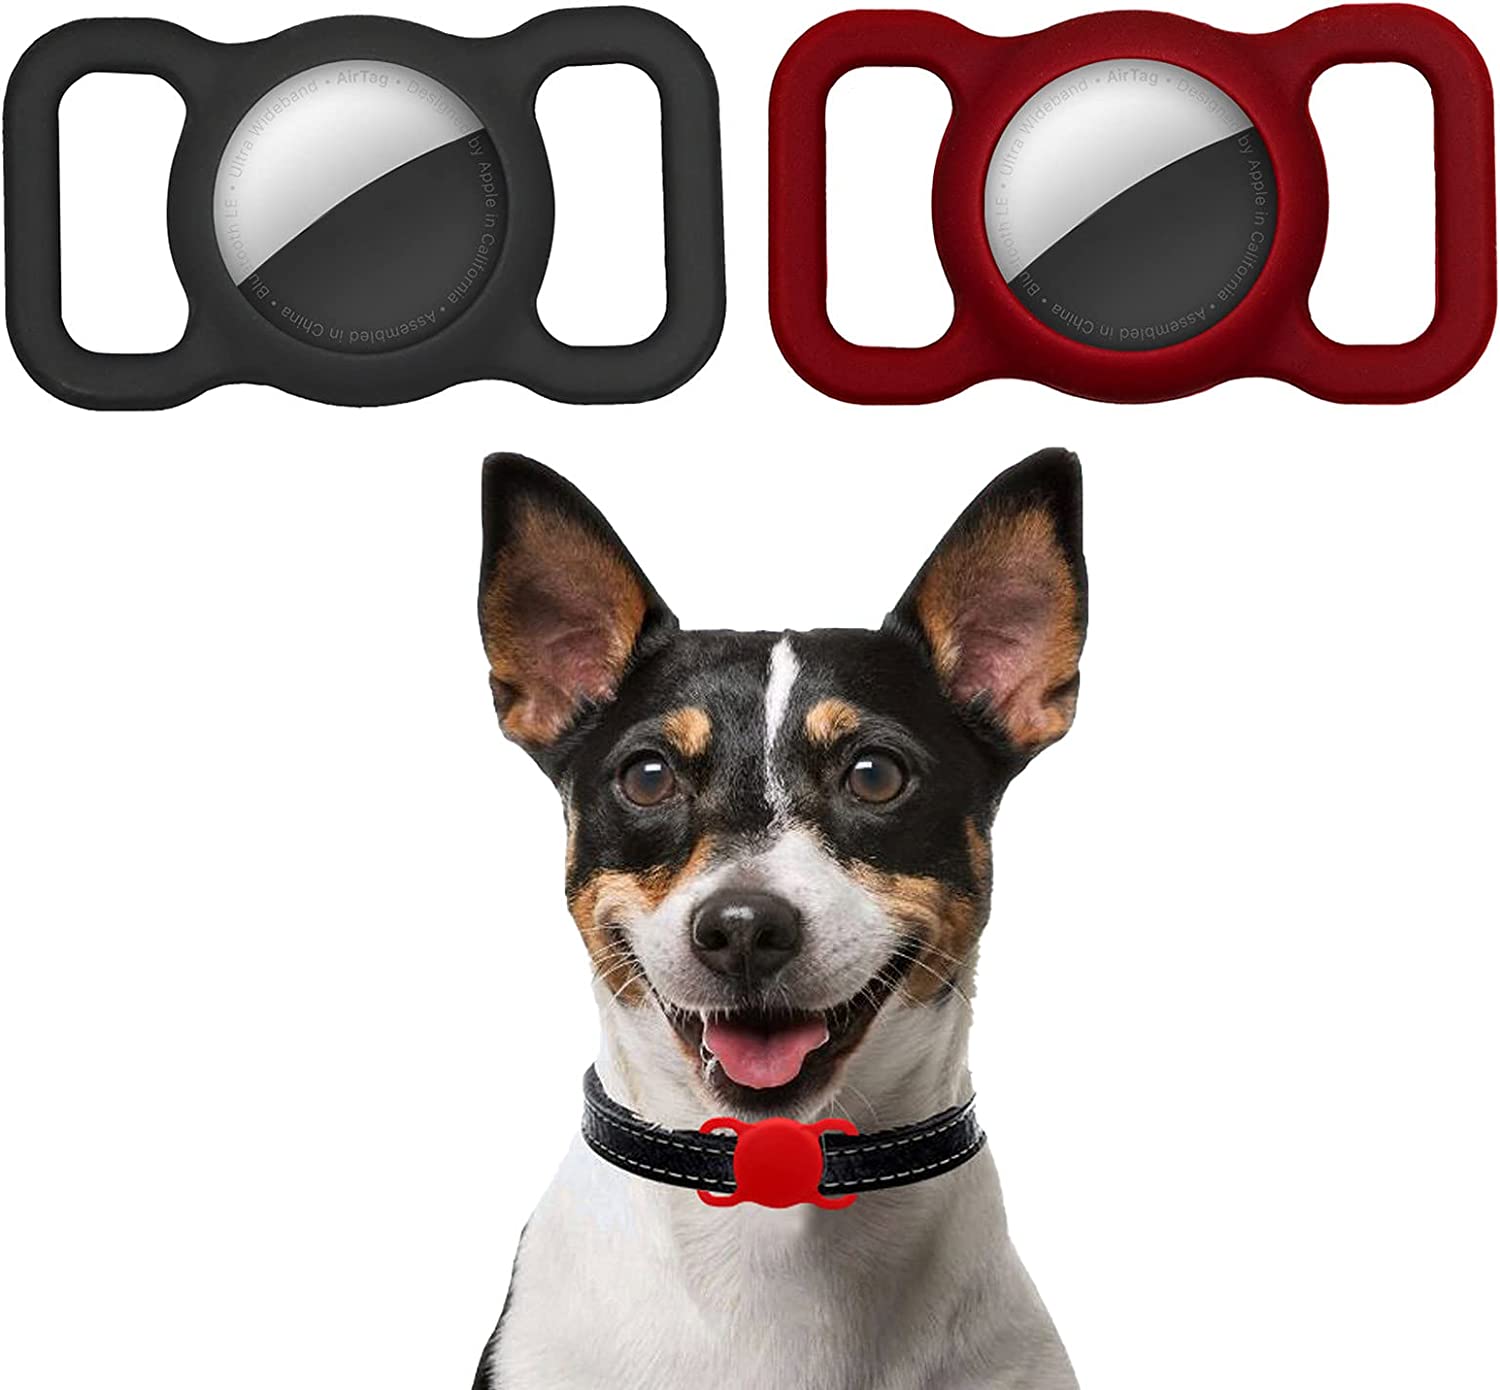 Air Tag Dog Collar Holder Waterproof Small Compatible Protective Cover for Apple Airtag GPS Tracking Dog Cat Soft Silicone Waterproof Protective for Pet Dog Cat and Children Elderly Bags Electronics > GPS Accessories > GPS Cases YAFIYGI 2PCS Black+Red  